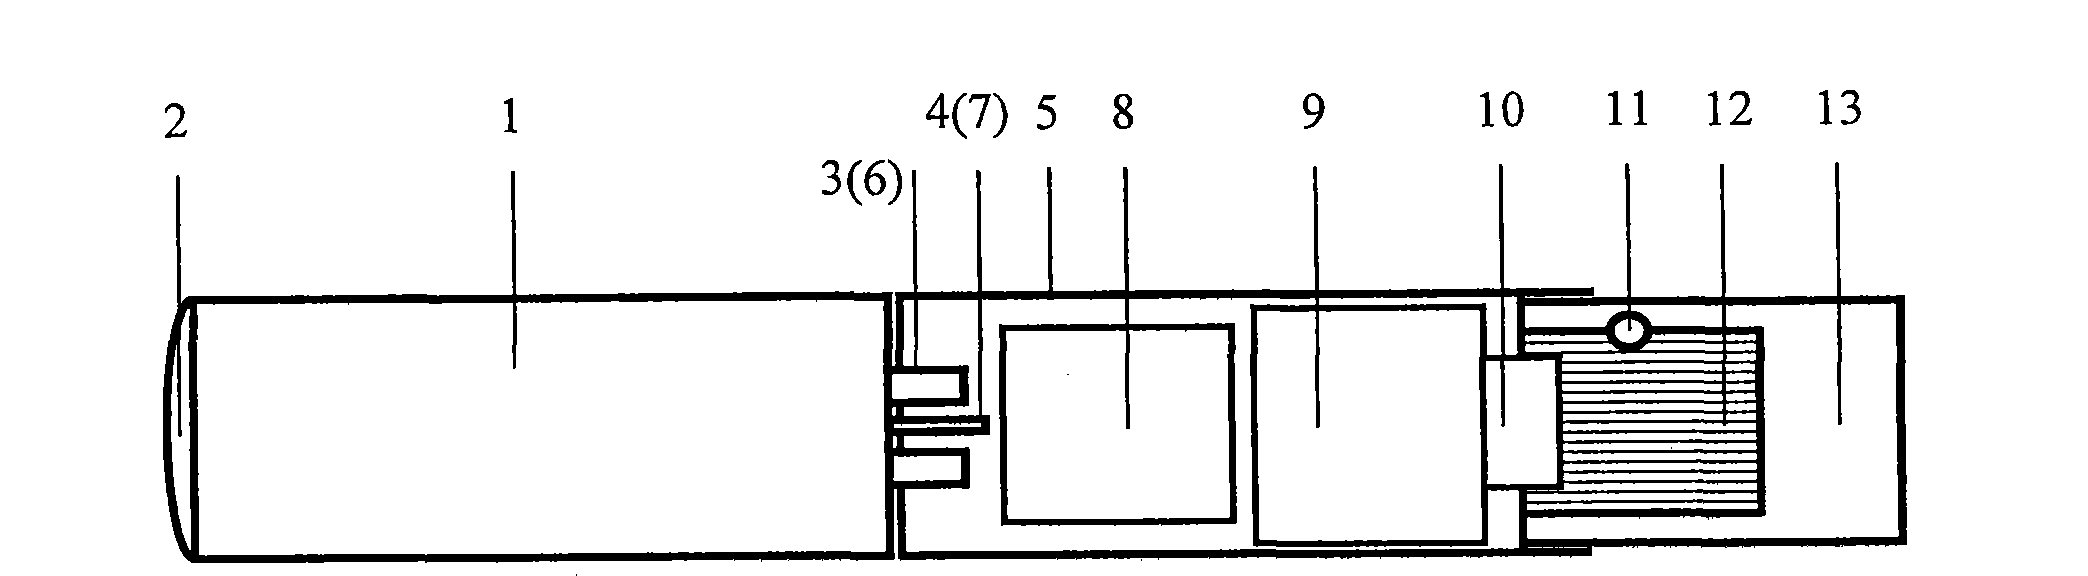 Heating atomization electronic cigarette using capacitances to supply power